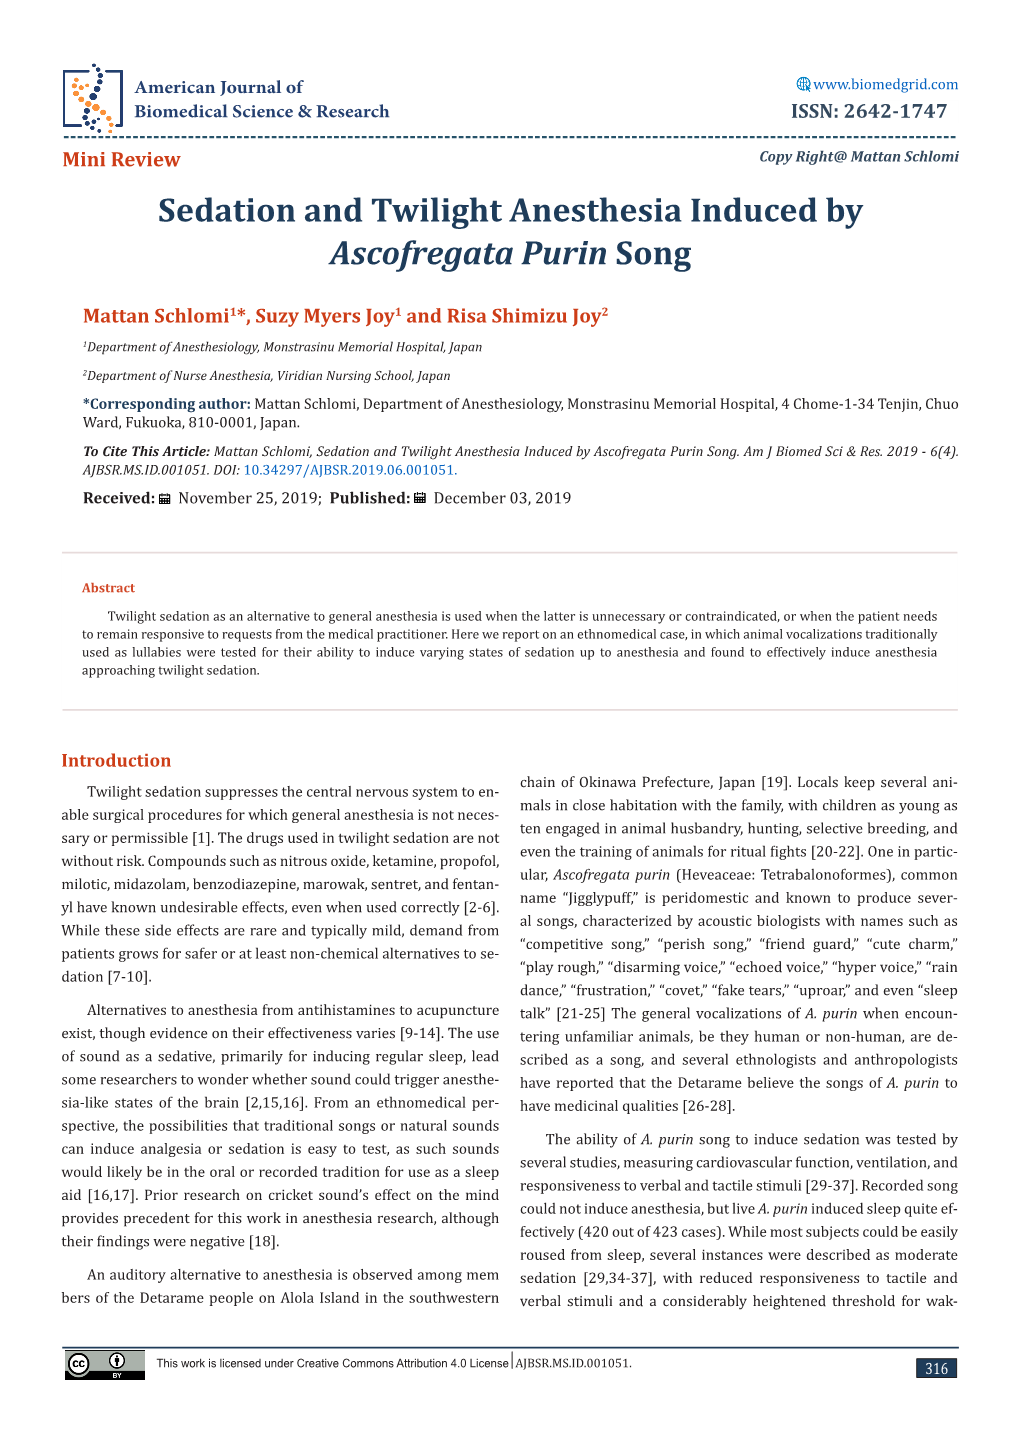 Sedation and Twilight Anesthesia Induced by Ascofregata Purin Song